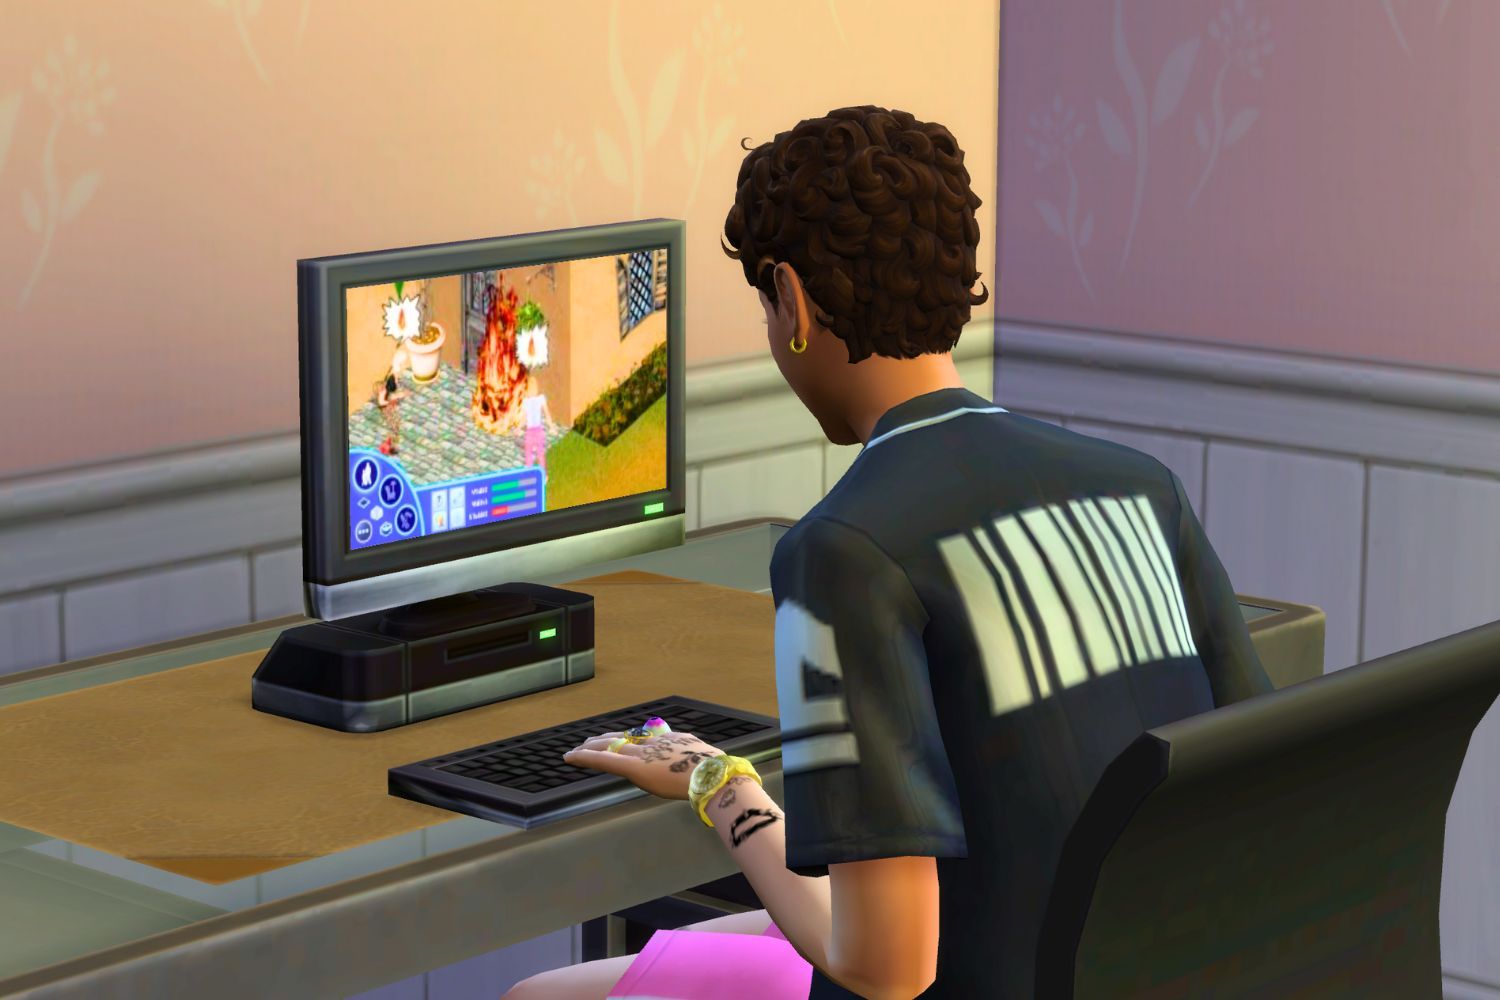 An androgynous Sim sits at a computer in a pink room. They are playing Sims Forever as one of their Sims tries to put out a fire.